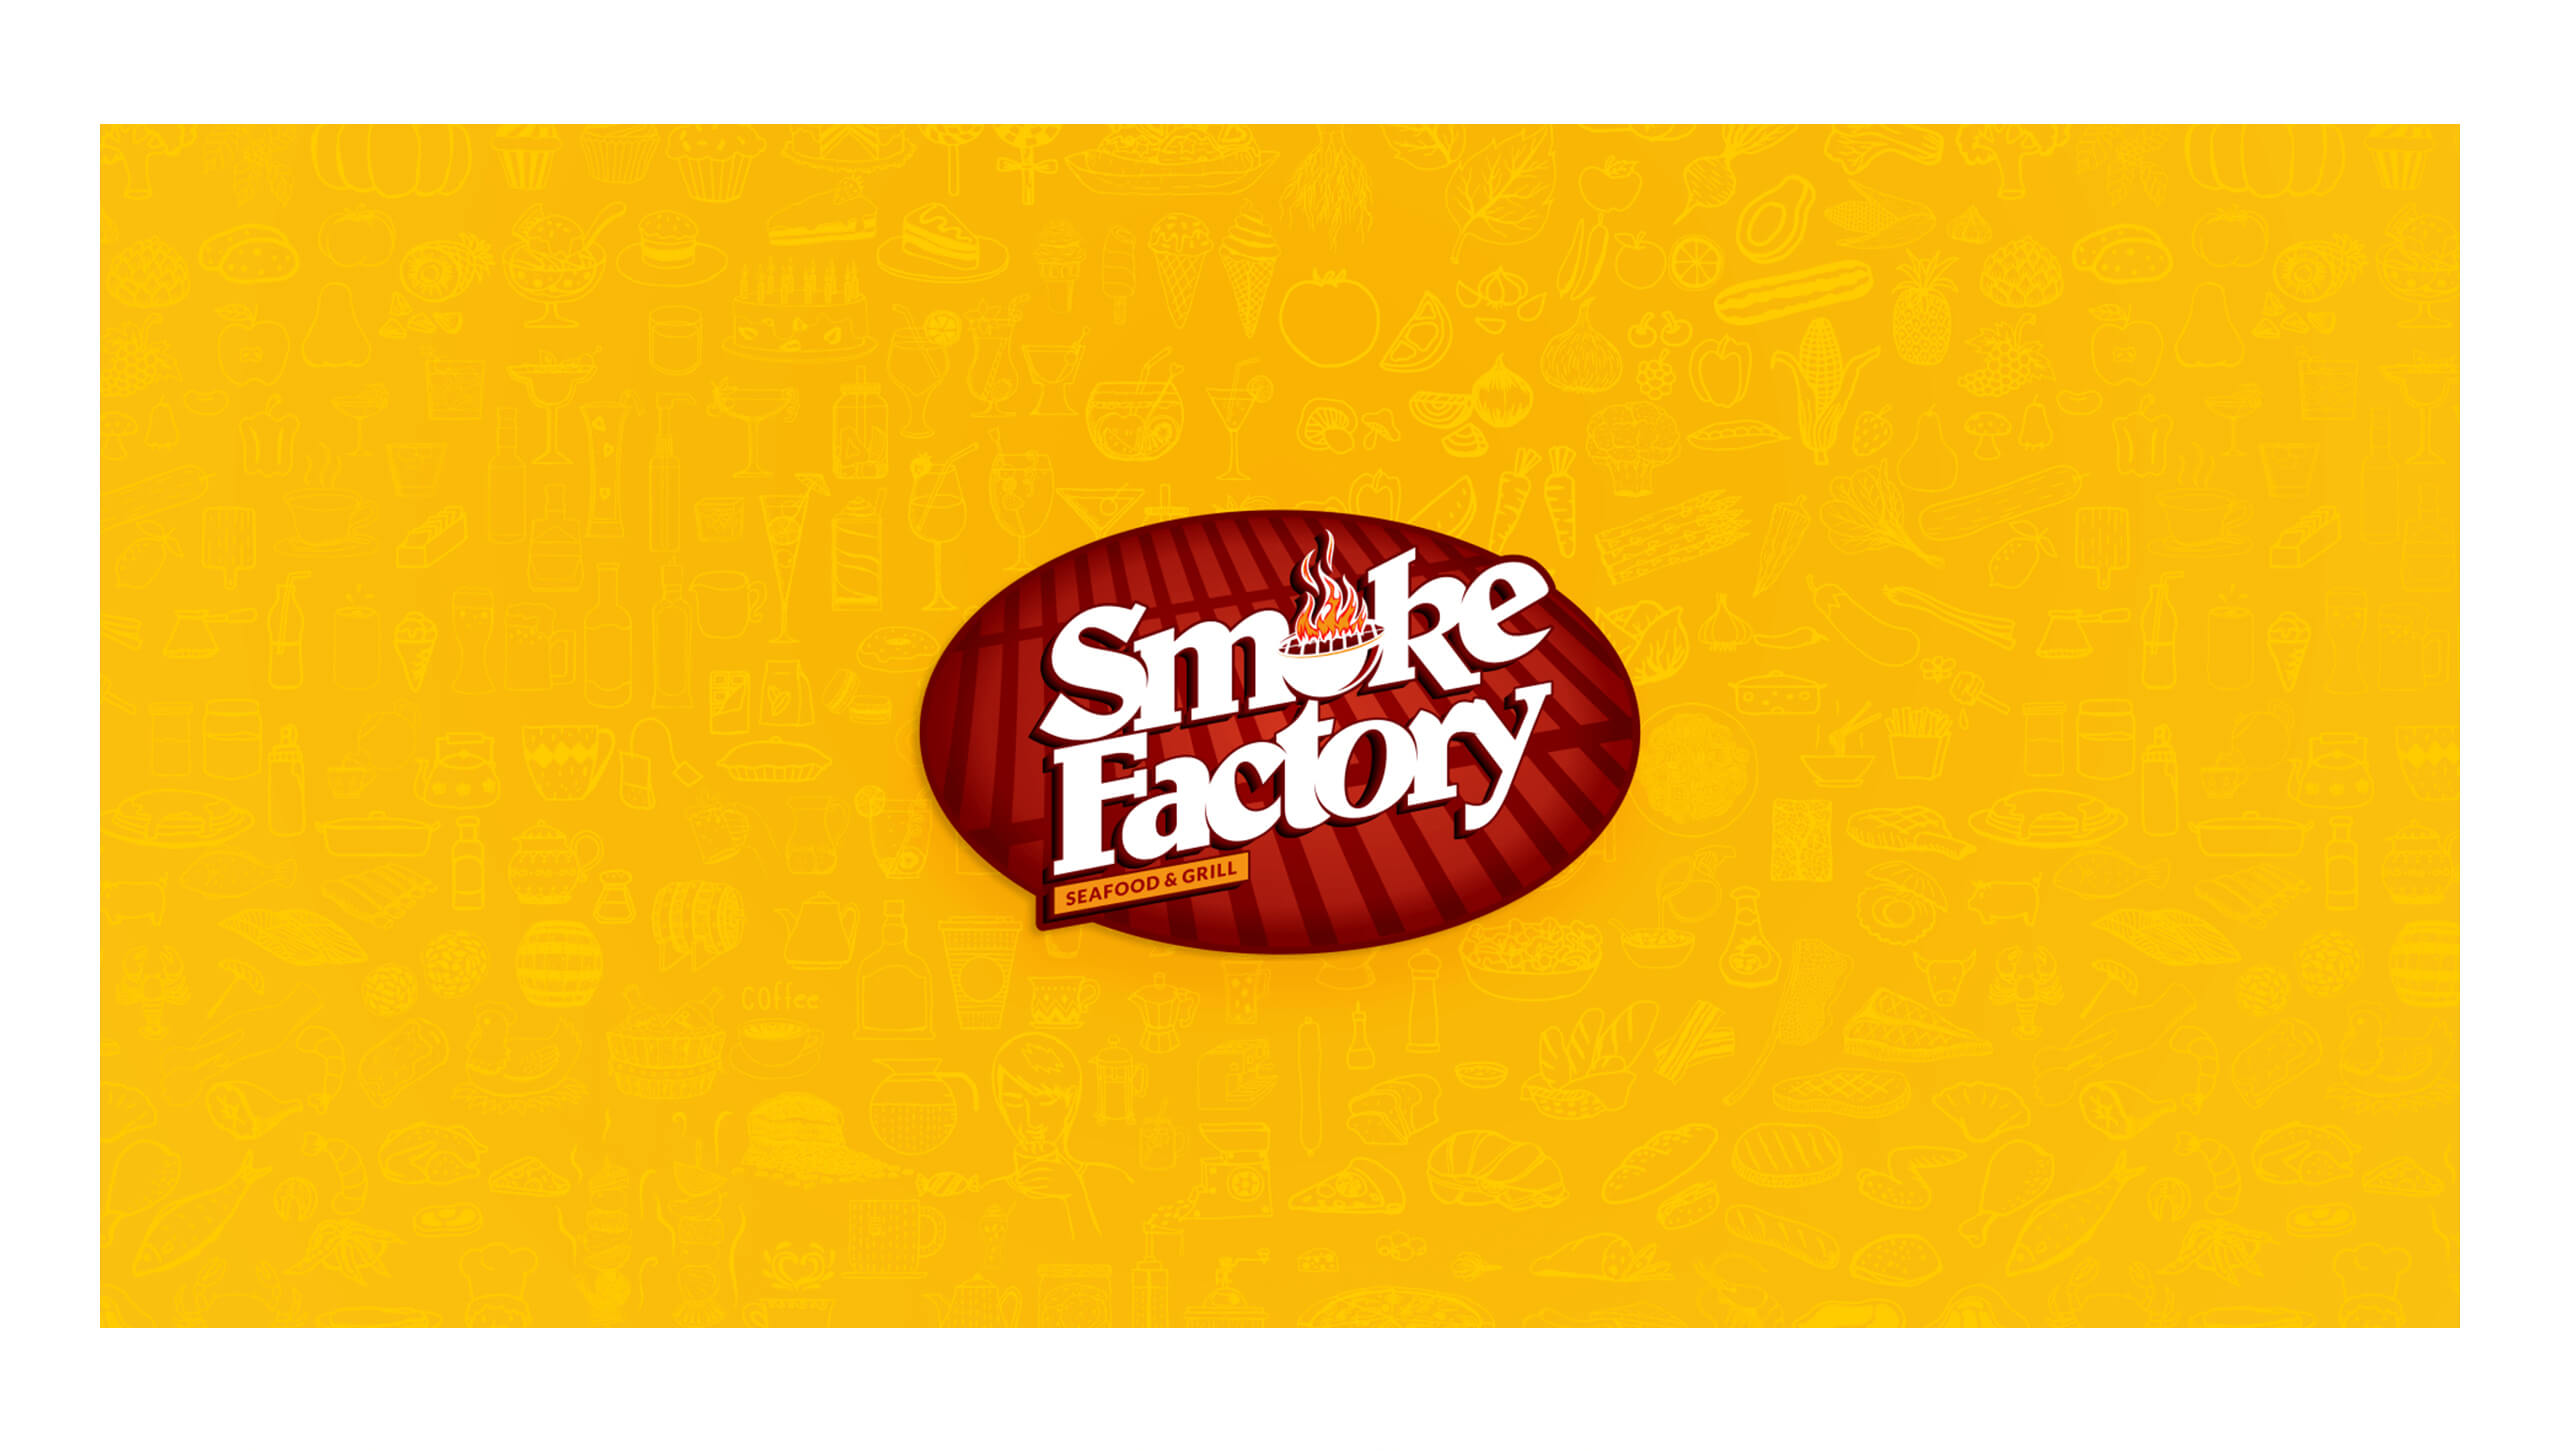 Smoke Factory - Restaurant Re-Branding - with One&Only